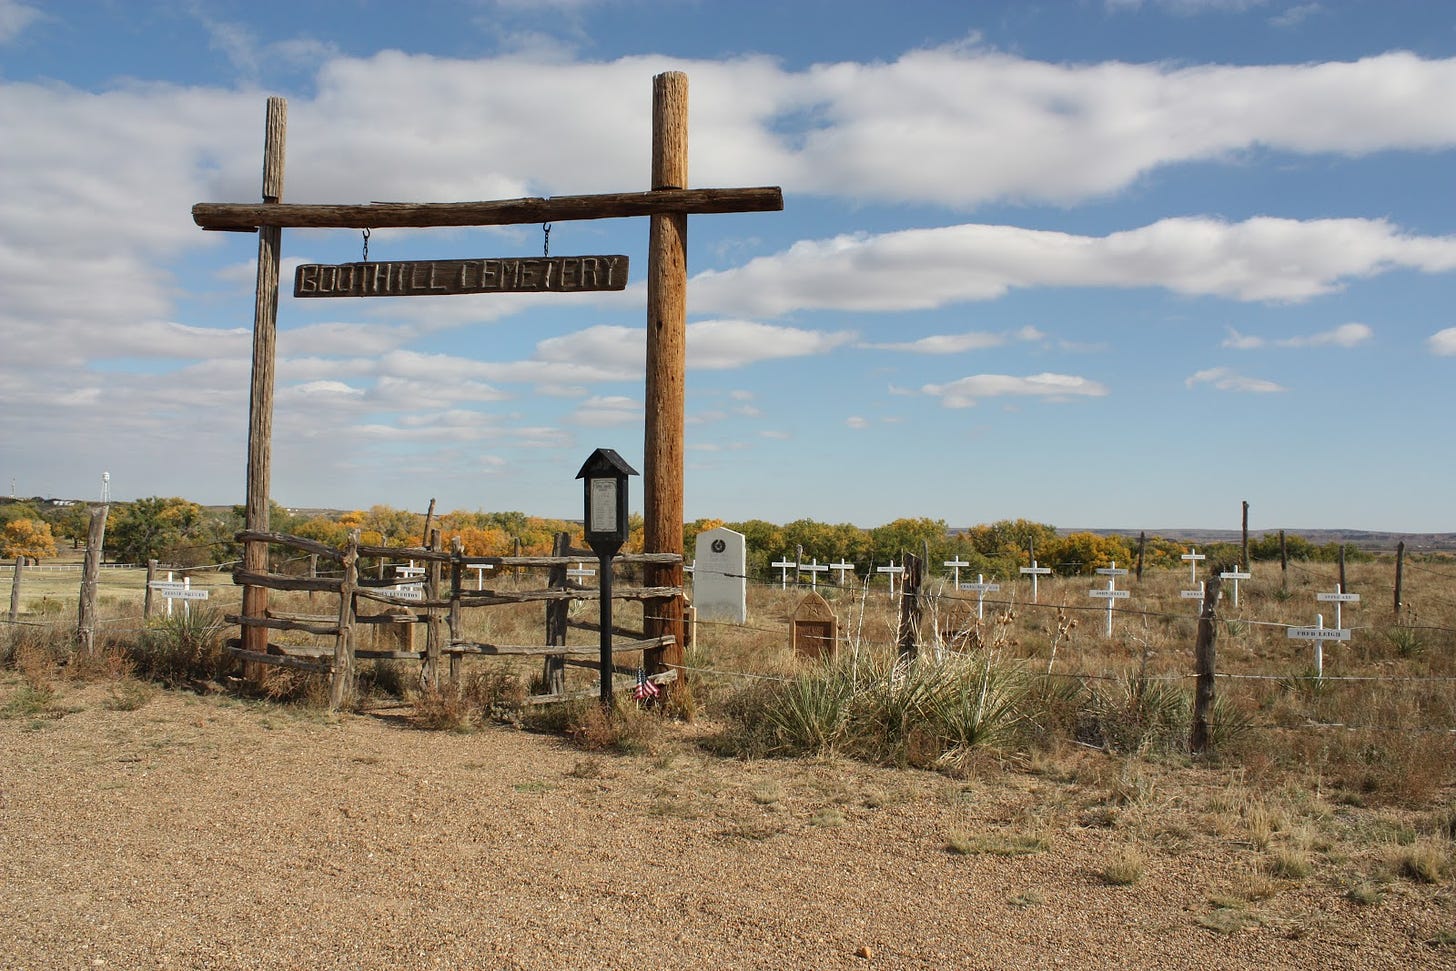 Entrance to Tascosa's boot hill cemetary